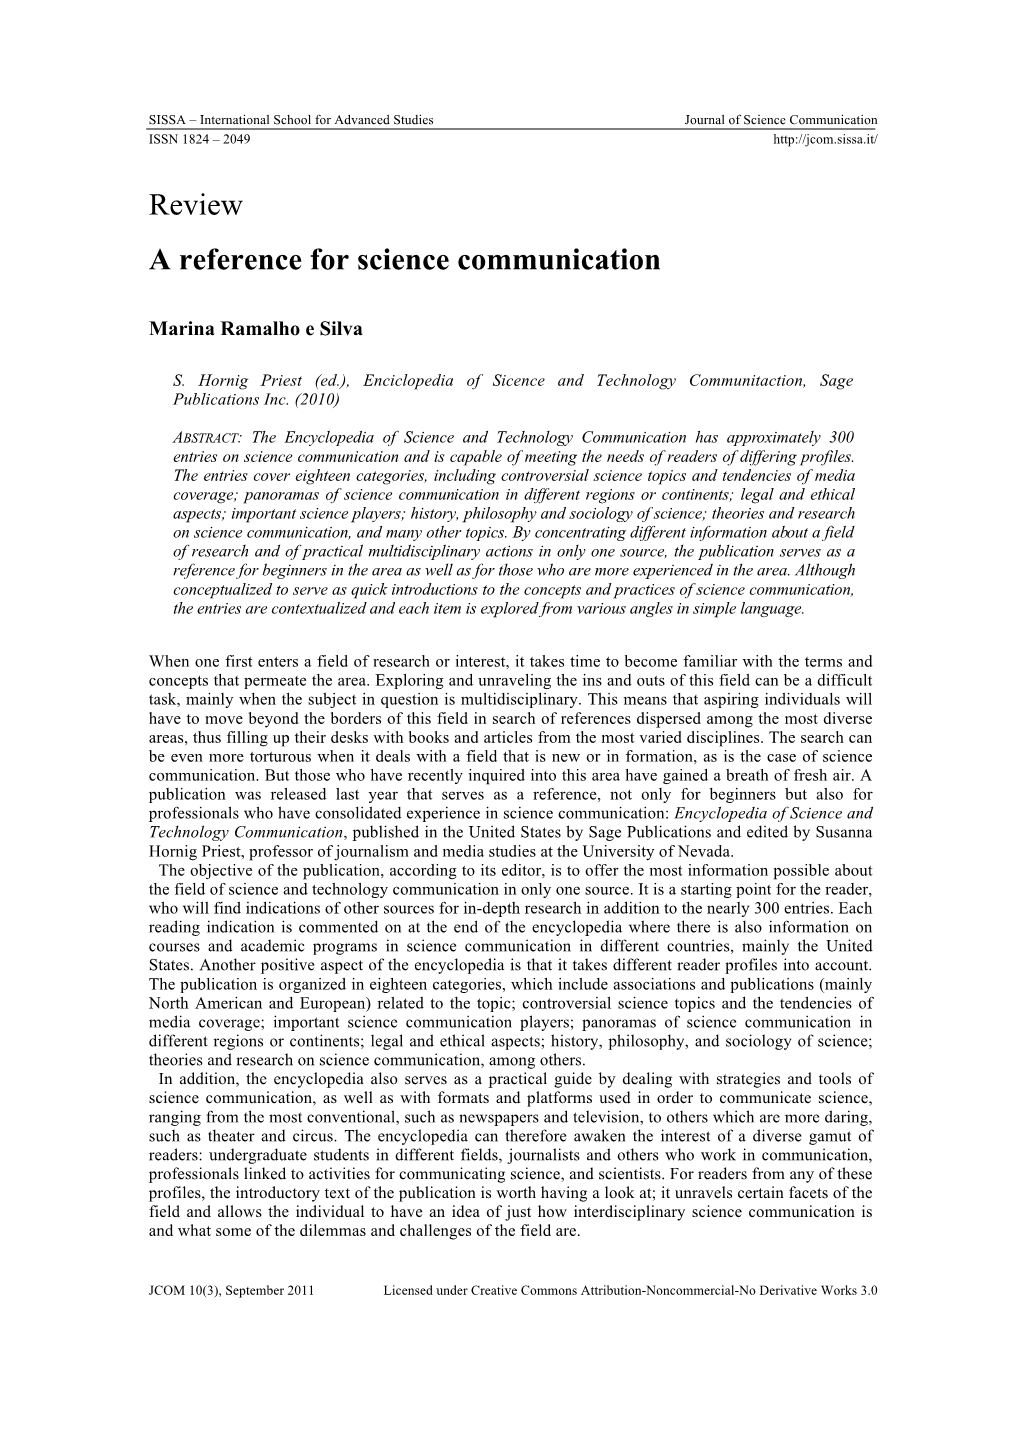 Review a Reference for Science Communication